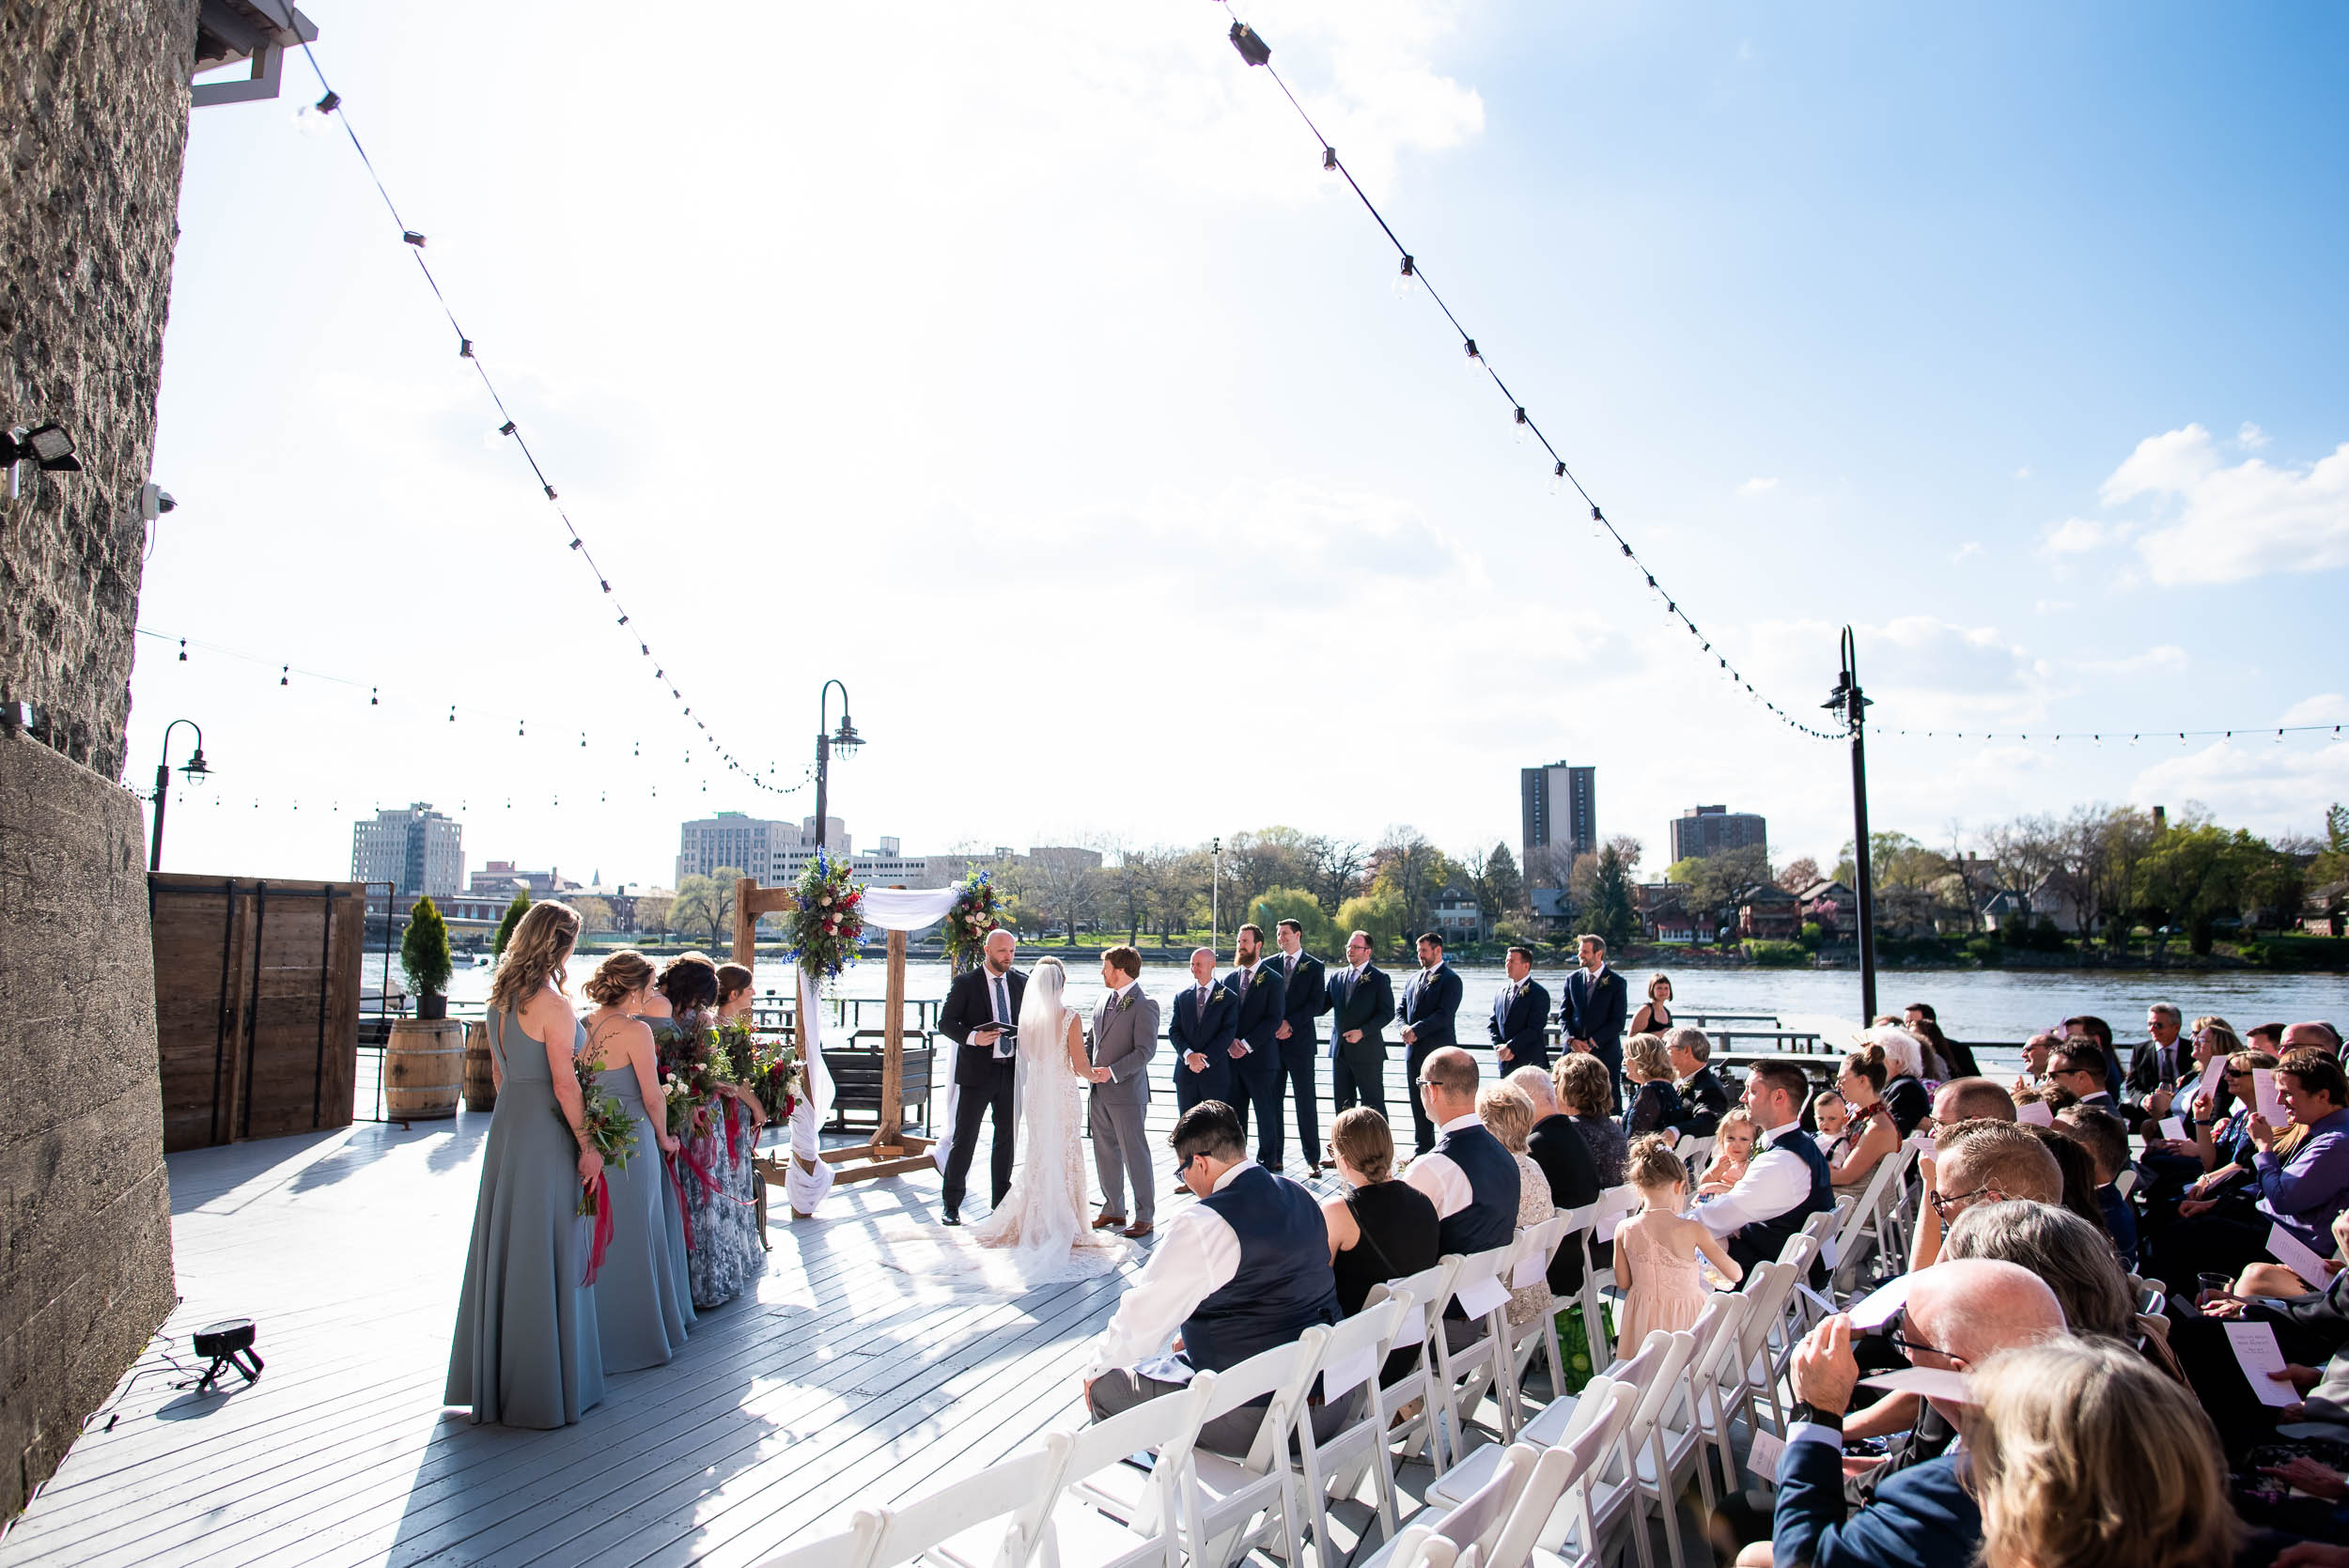 Outdoor wedding ceremony ideas: Modern industrial Chicago wedding inside Prairie Street Brewhouse captured by J. Brown Photography. Find more wedding ideas at jbrownphotography.com!